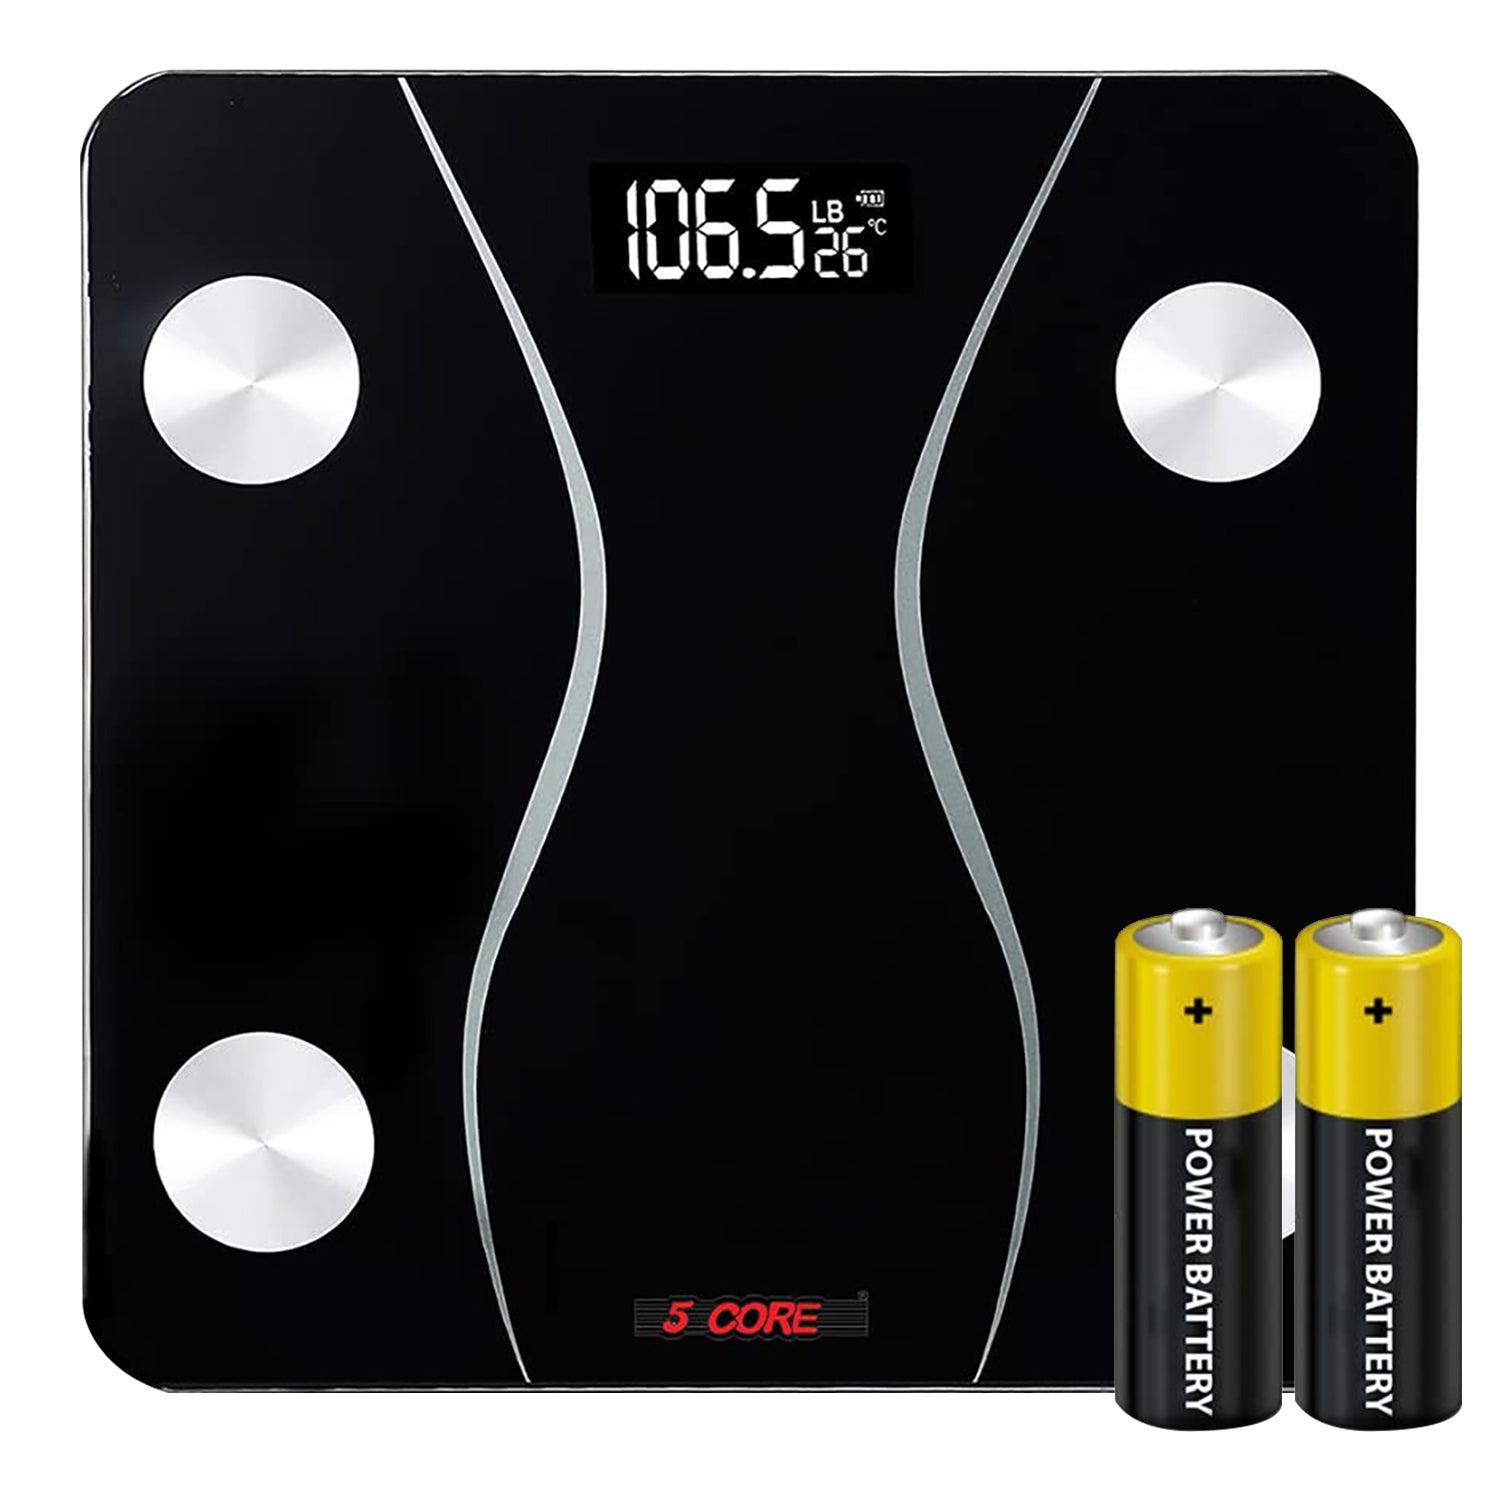 5 Core Smart Weight Scale Body Weight Digital Bathroom Scale BMI Weighing Body Fat Scale Monitor Health Analyzer 400 lbs Capacity - BS 01 B BLK